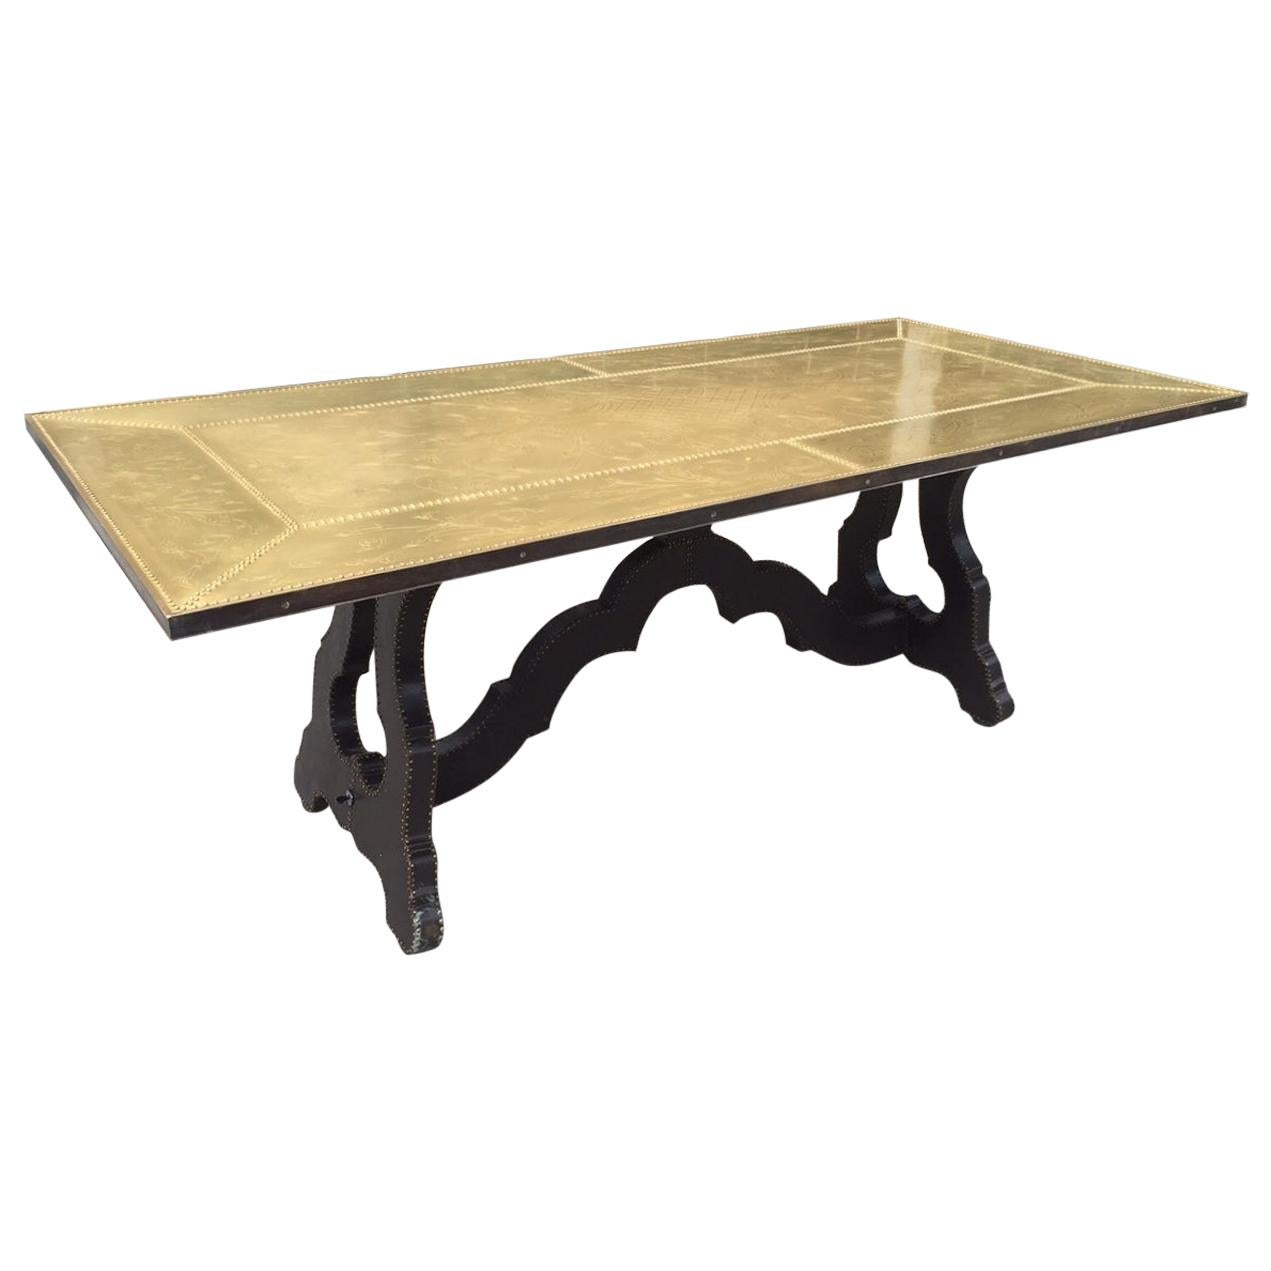 Spanish Bronze Etched Top Trestle Table For Sale